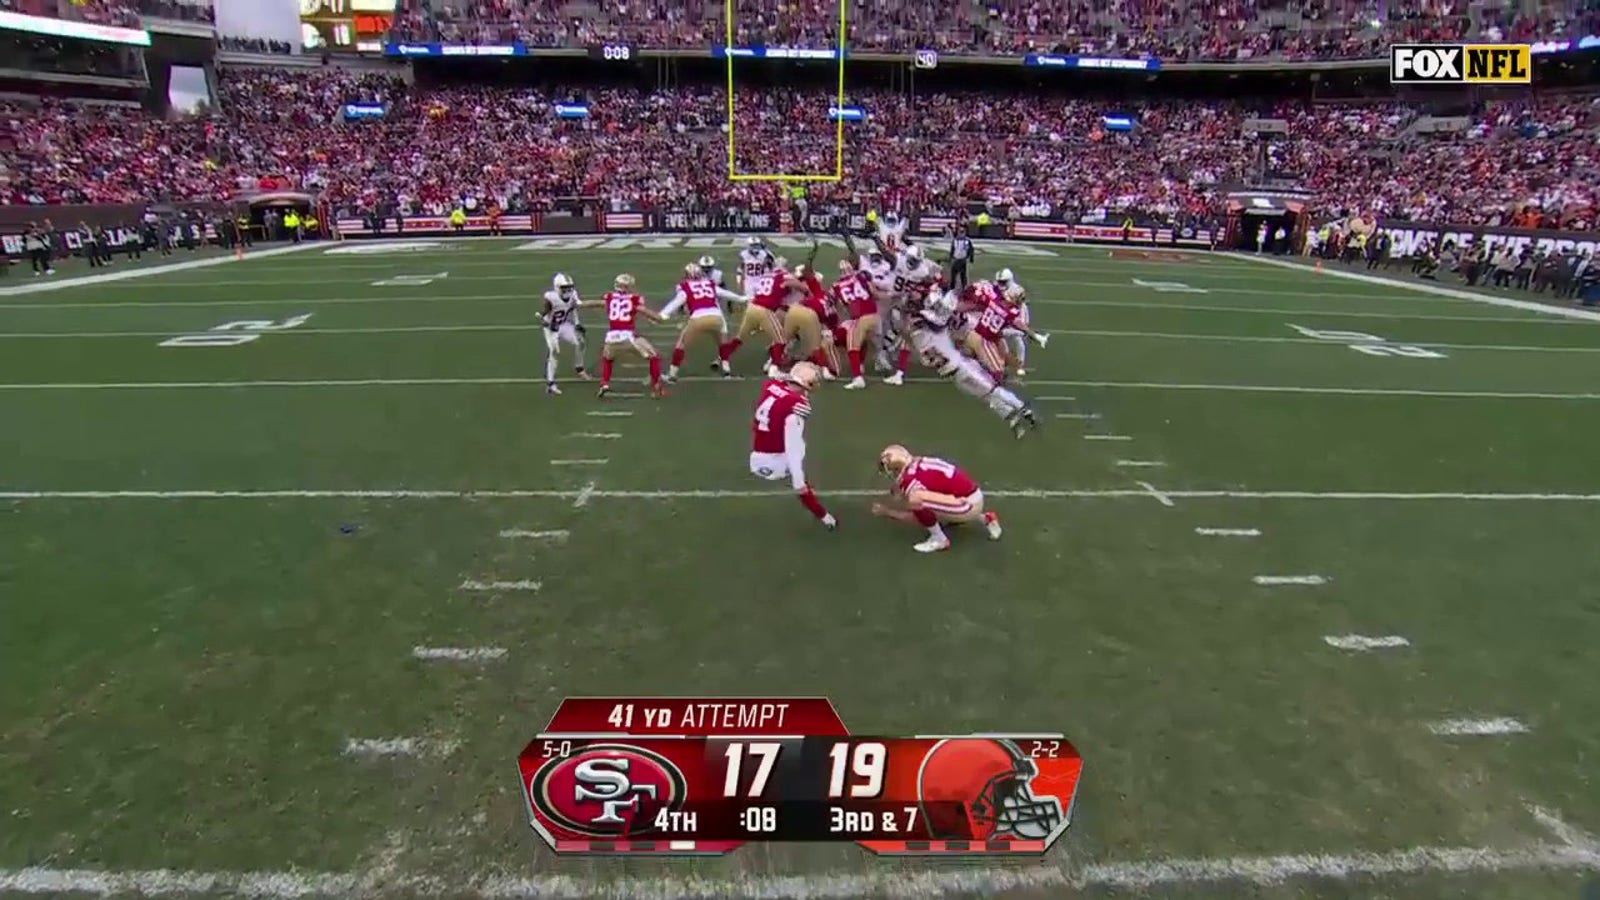 49ers' Jake Moody misses a 41-yard, game-winning FG attempt